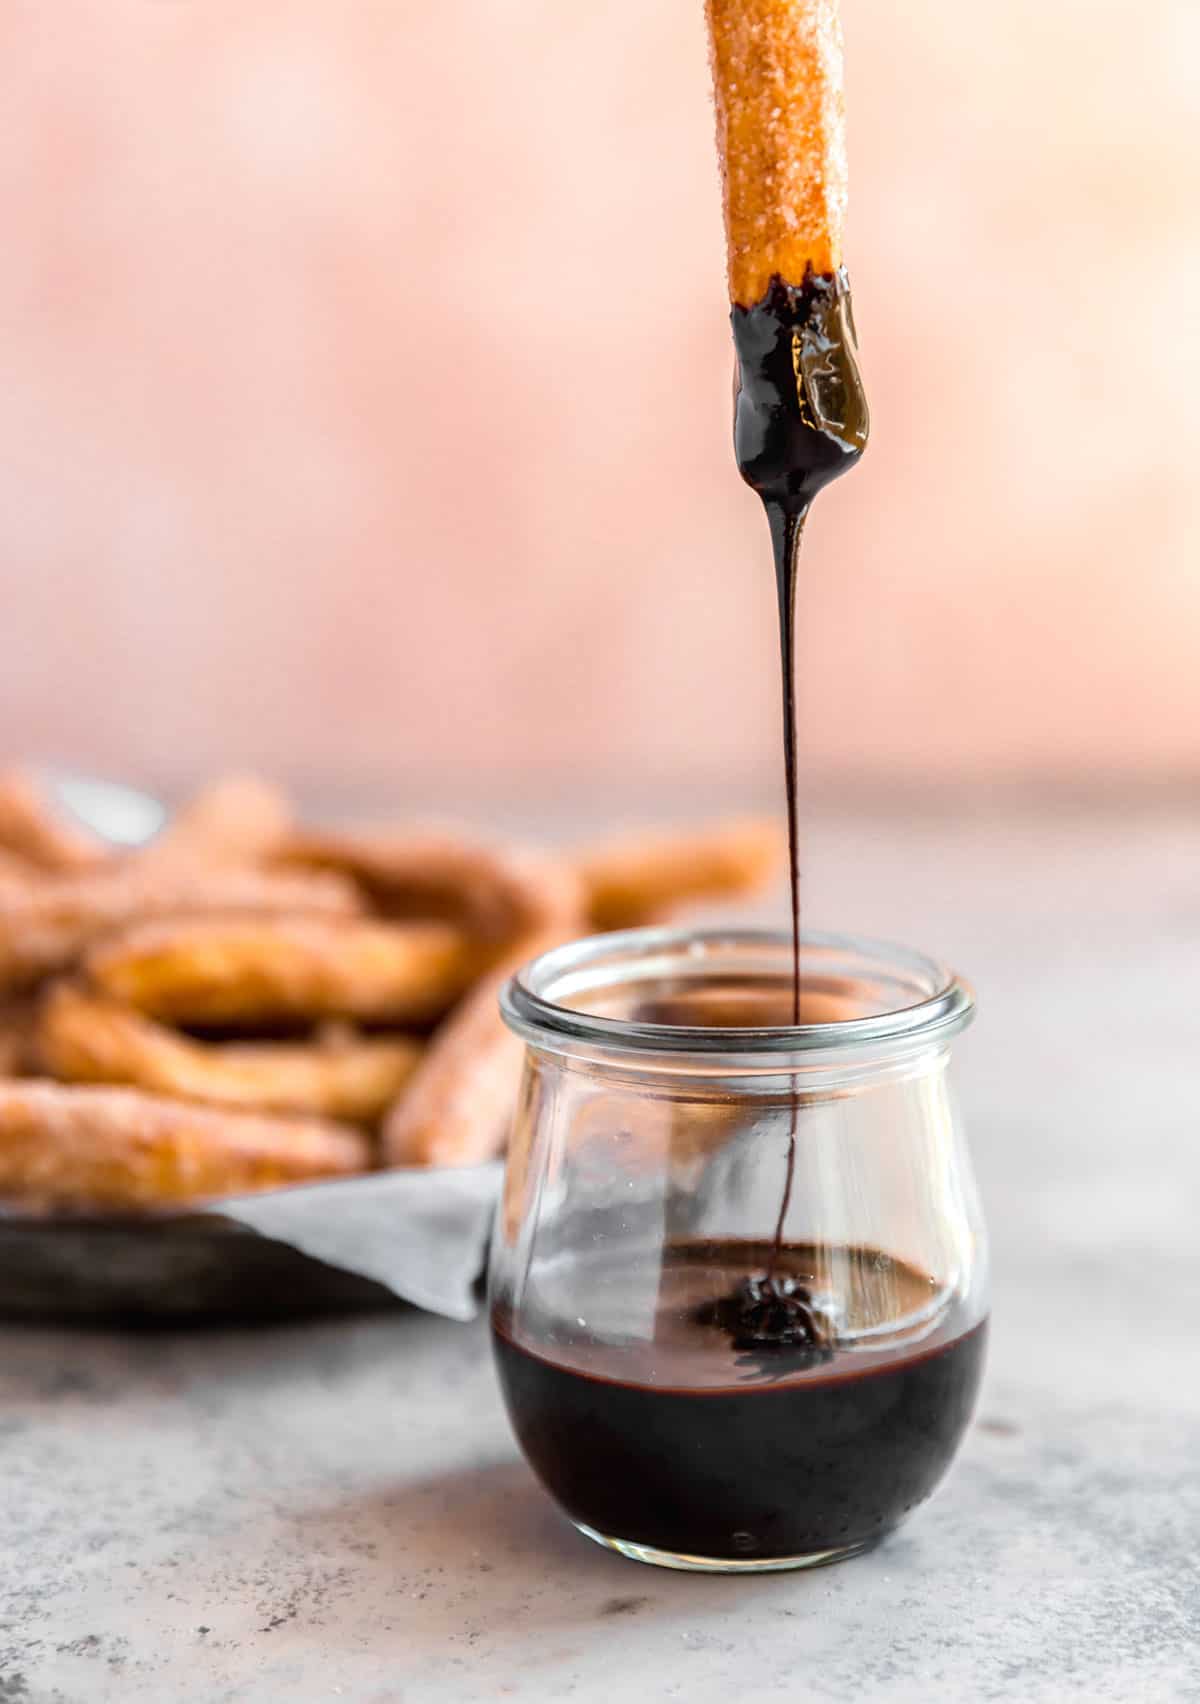 A glass jar with melted chocolate and a churro dipped in with chocolate drizzling back into the jar and a platter of churros behind the chocolate jar.